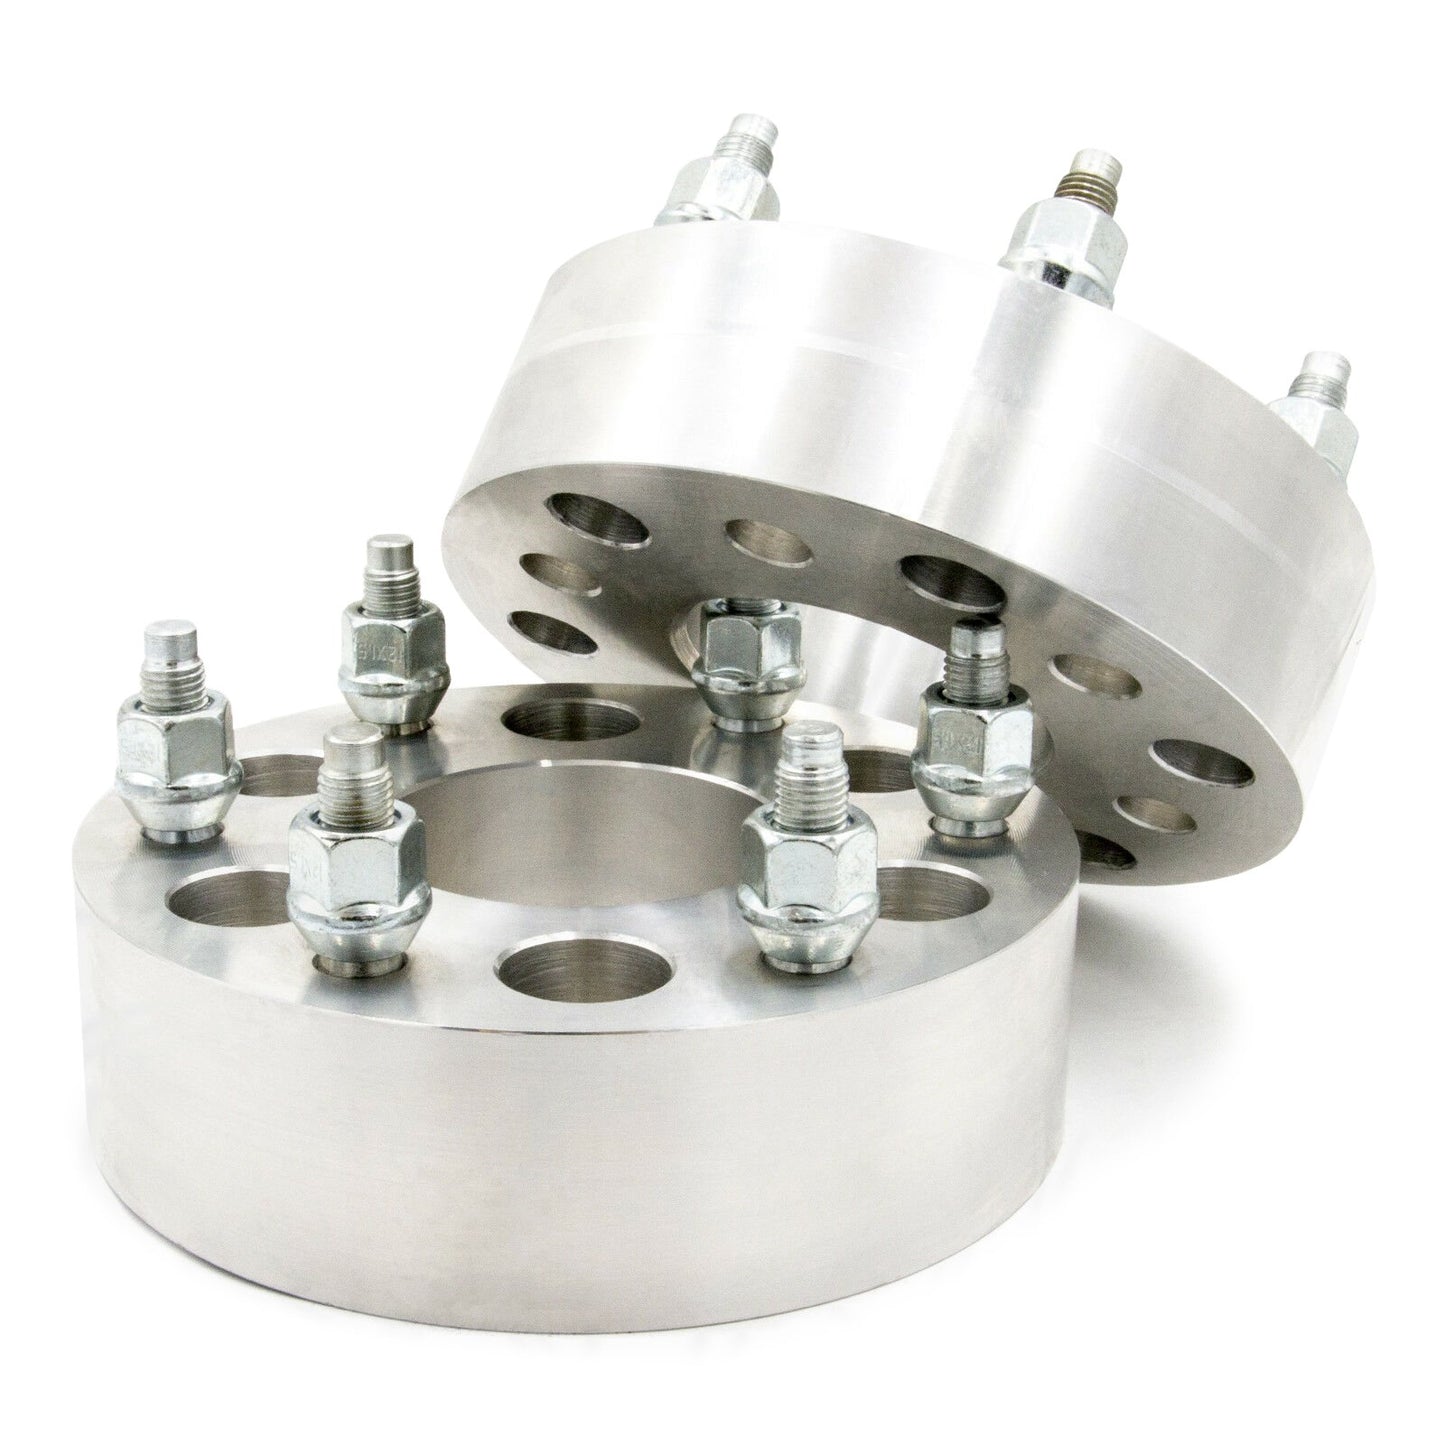 6x120 to 6x120 Wheel Spacer/Adapter - Thickness: 3/4"- 4"